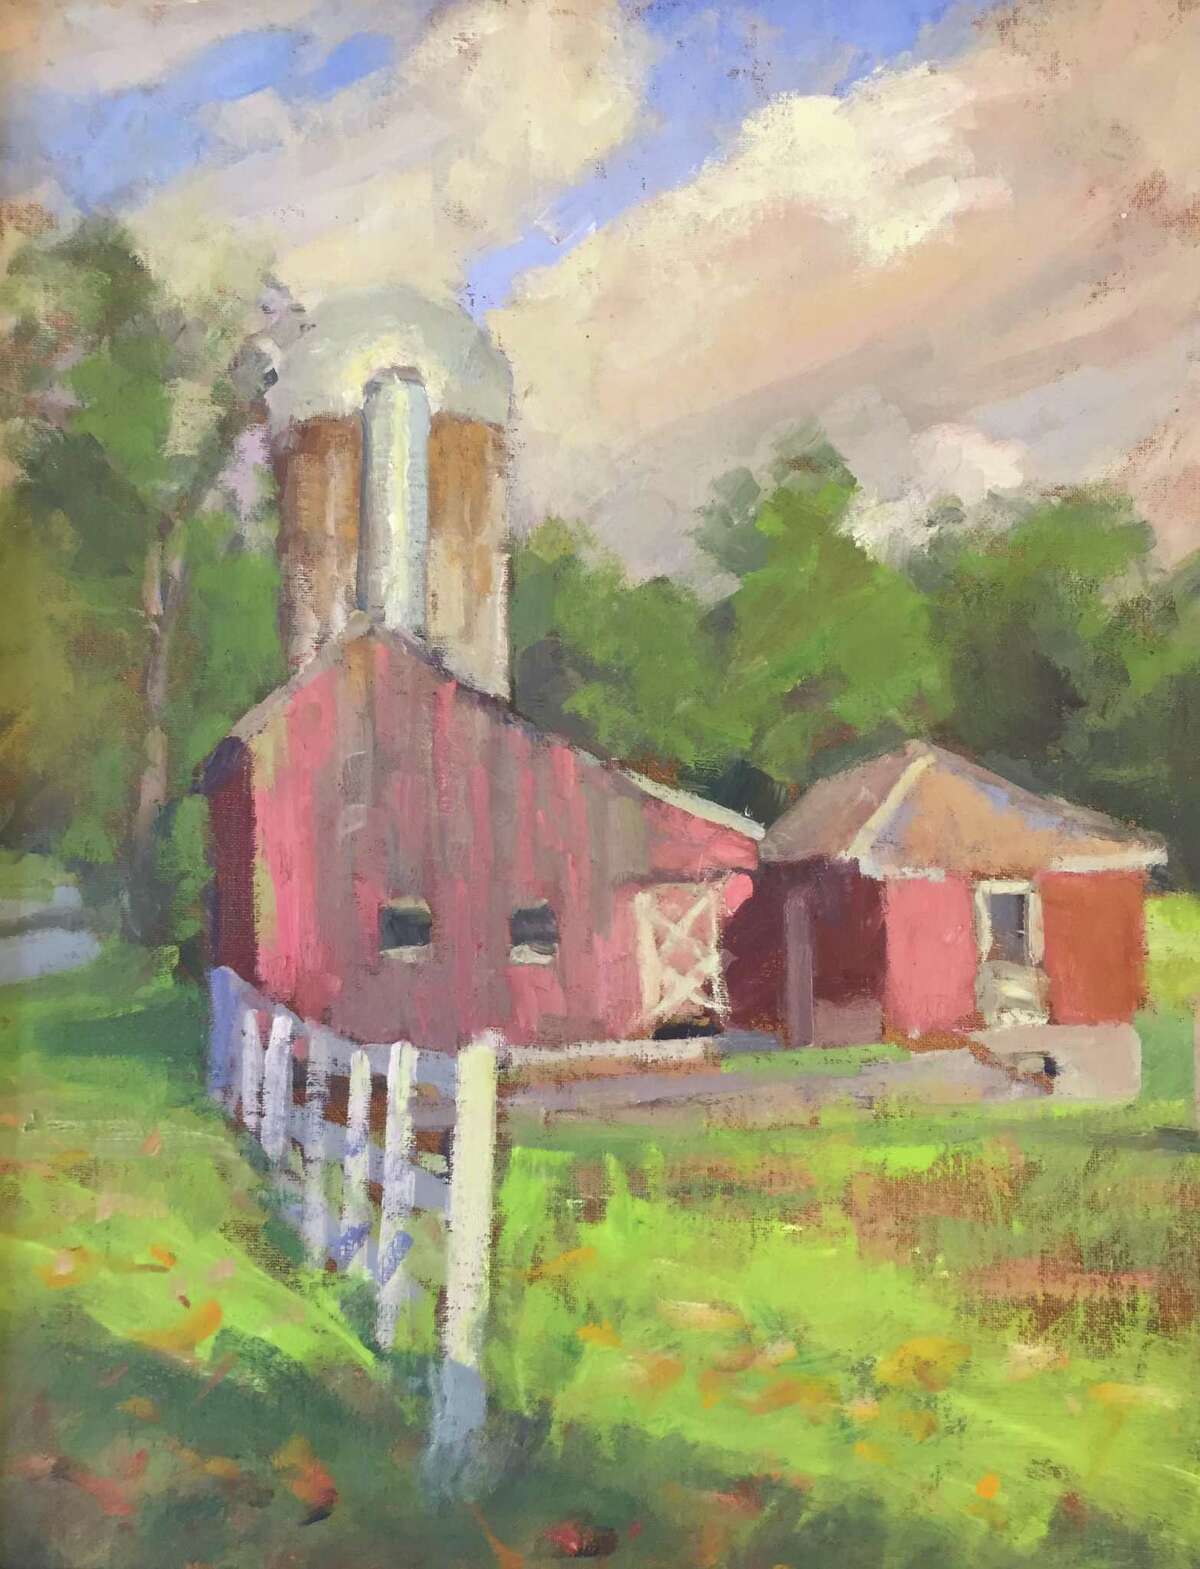 “Barn in South Kent,” oil on canvas is one of the paintings included in Susan Grisell’s exhibit “People, Places and Things.” The paintings will be on display from Jan. 15 to Feb. 29 in the Kent Memorial Library’s temporary gallery.